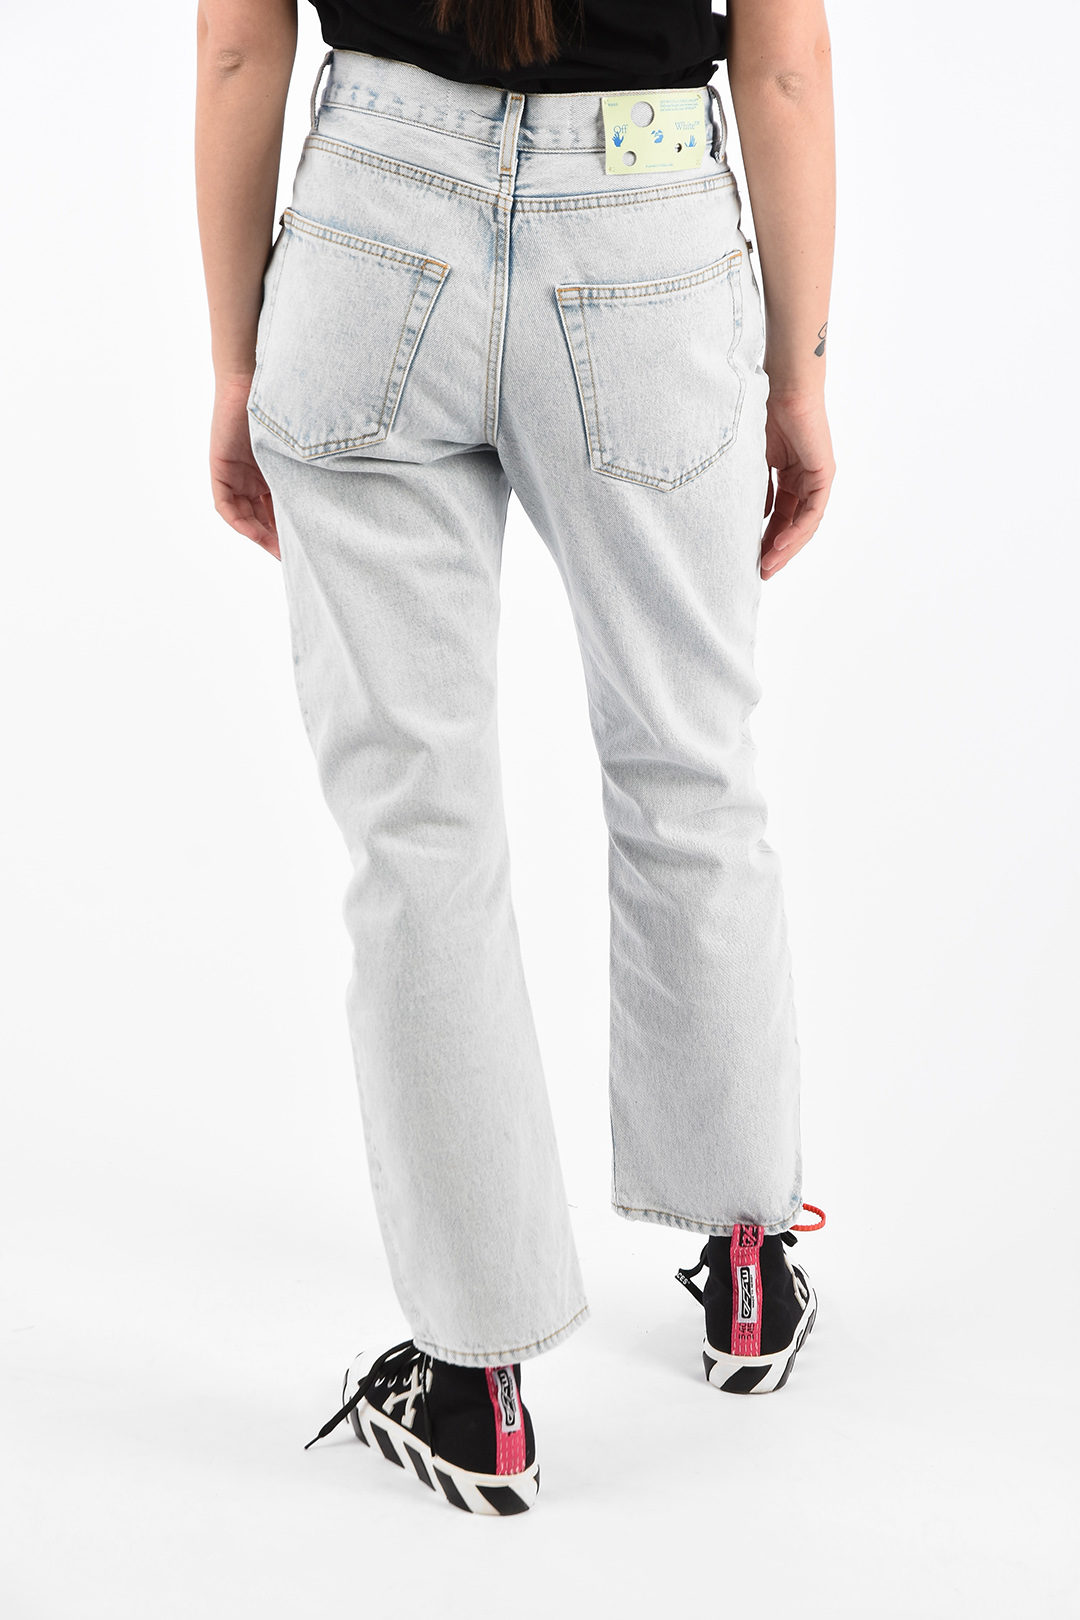 Off-White Bleach Jeans women - Outlet